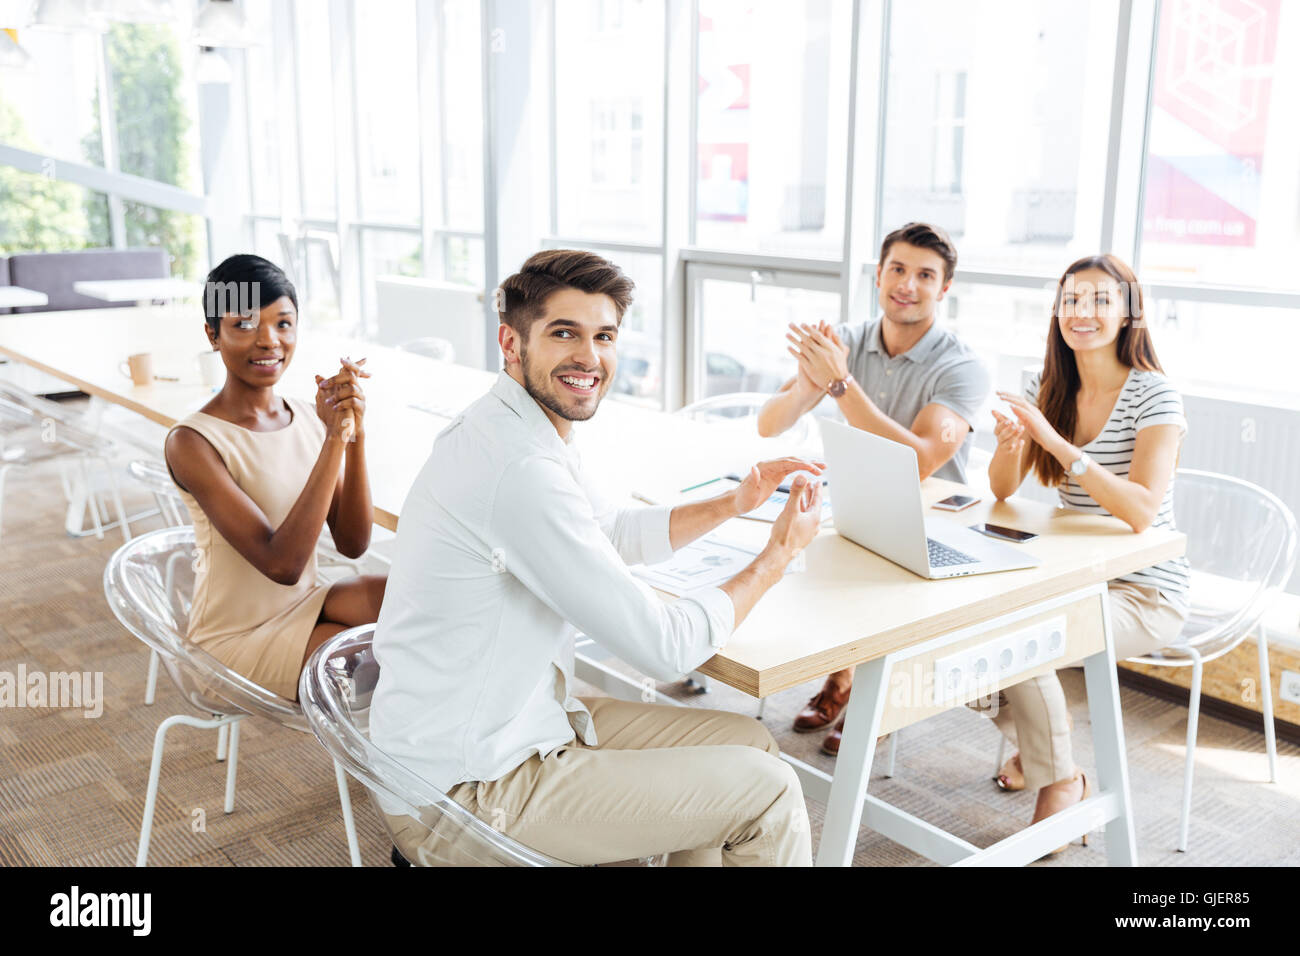 Group of cheerful young business people sitting and clapping hands during presentation in office Stock Photo